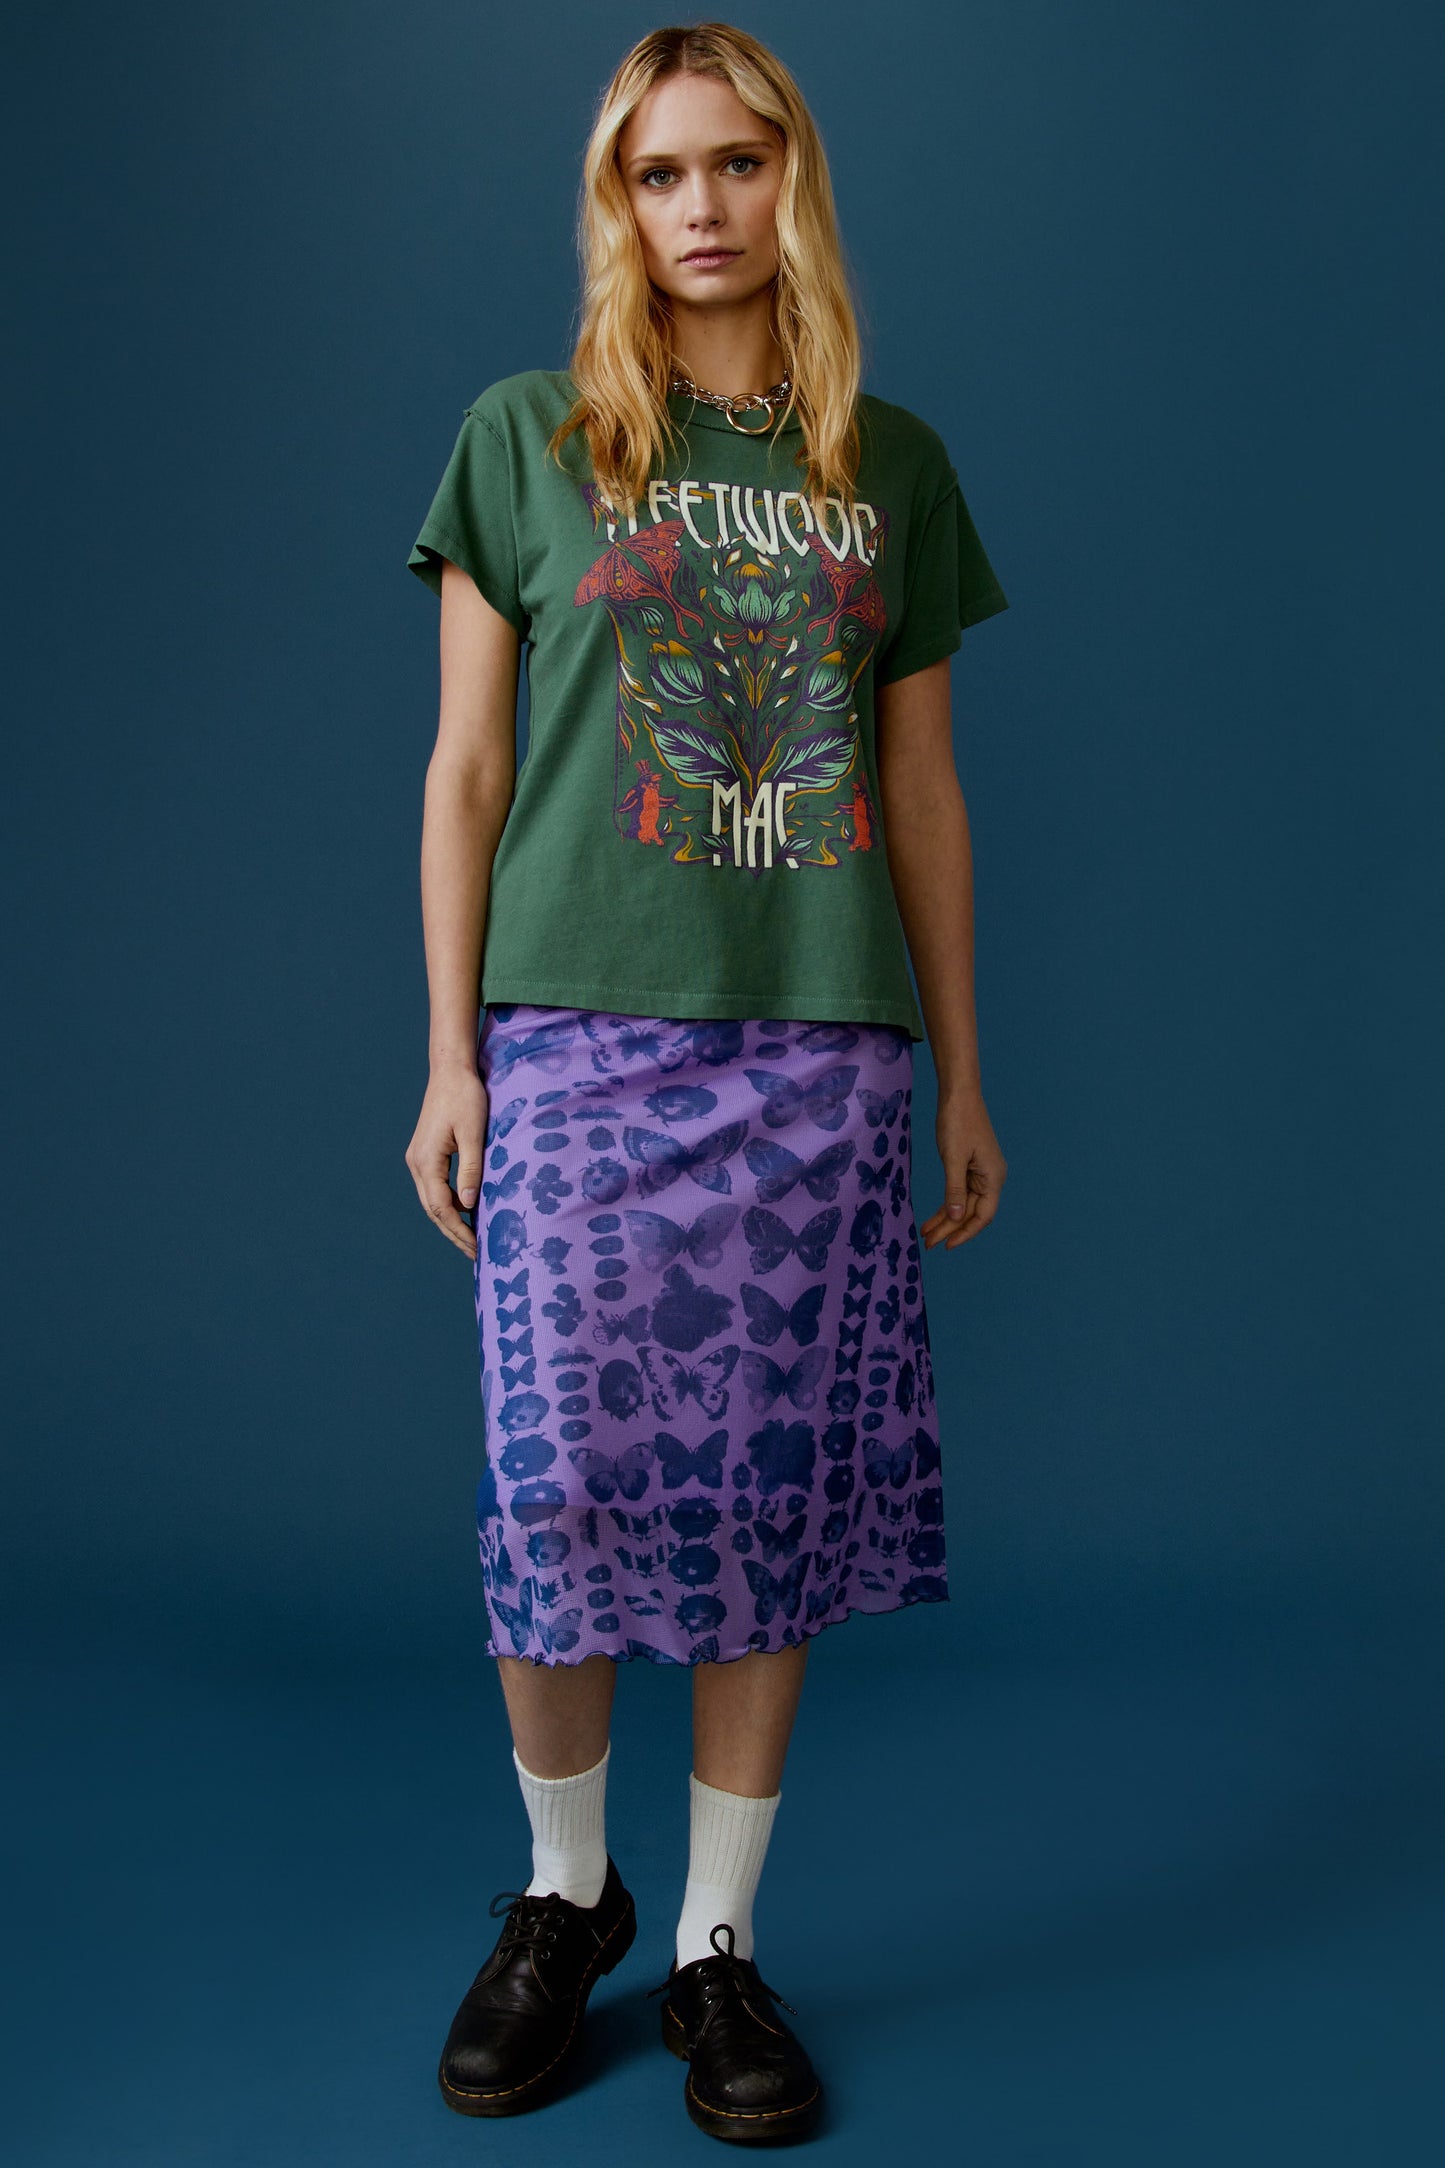 A blonde-haired model featuring a stormy green tee stamped with the band's name, designed with a graphic of leaves, flowers, and butterflies on the center.